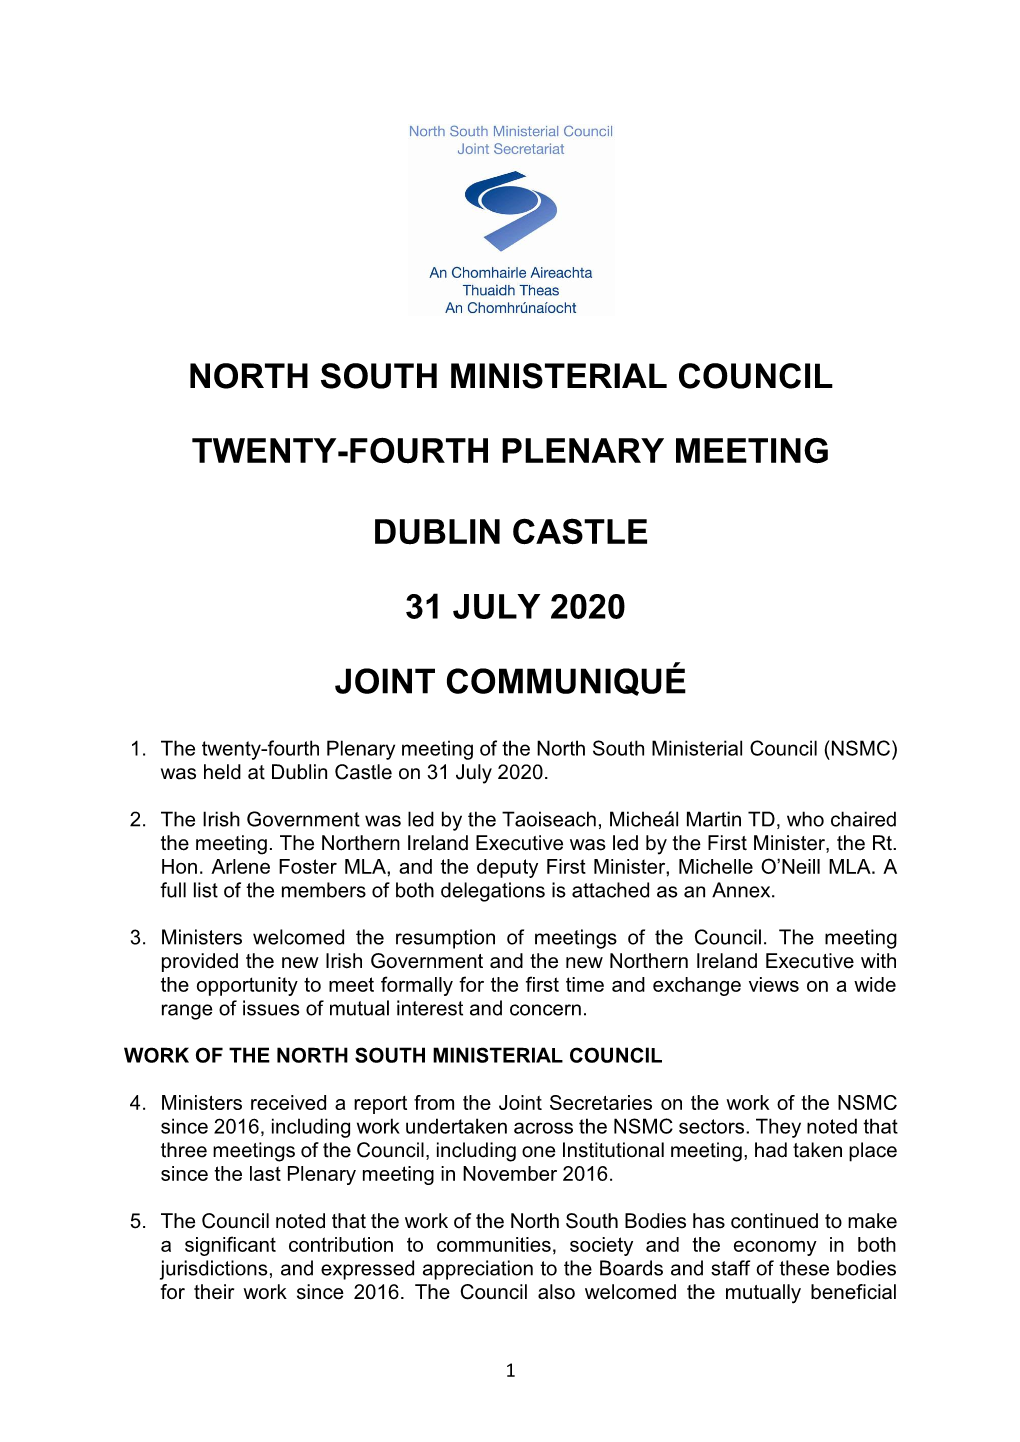 North South Ministerial Council Twenty-Fourth